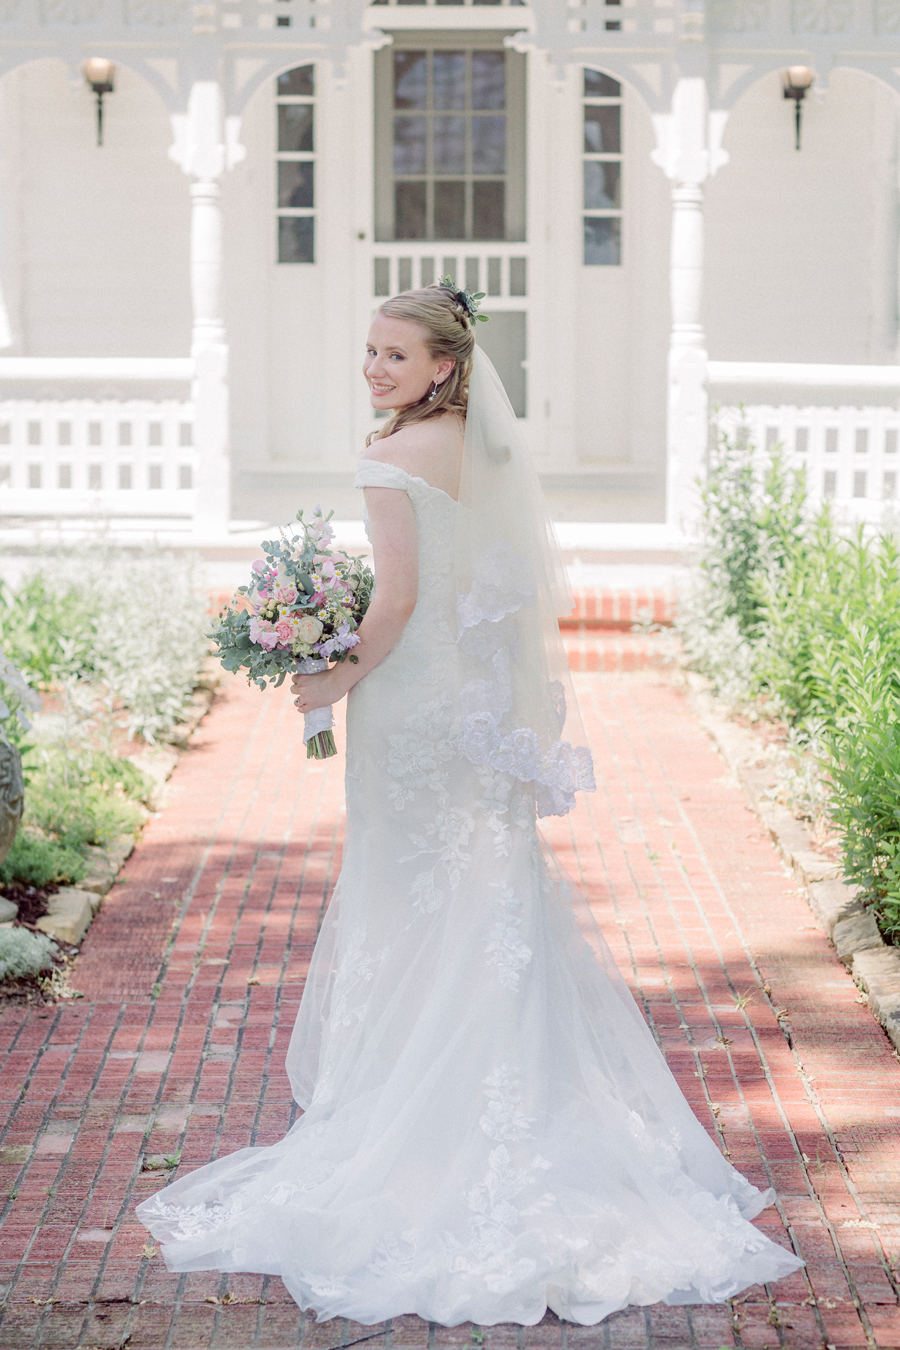 A bride looks back at the camera in front of the farm house at a Blue Bell Farm wedding by Love Tree Studios.